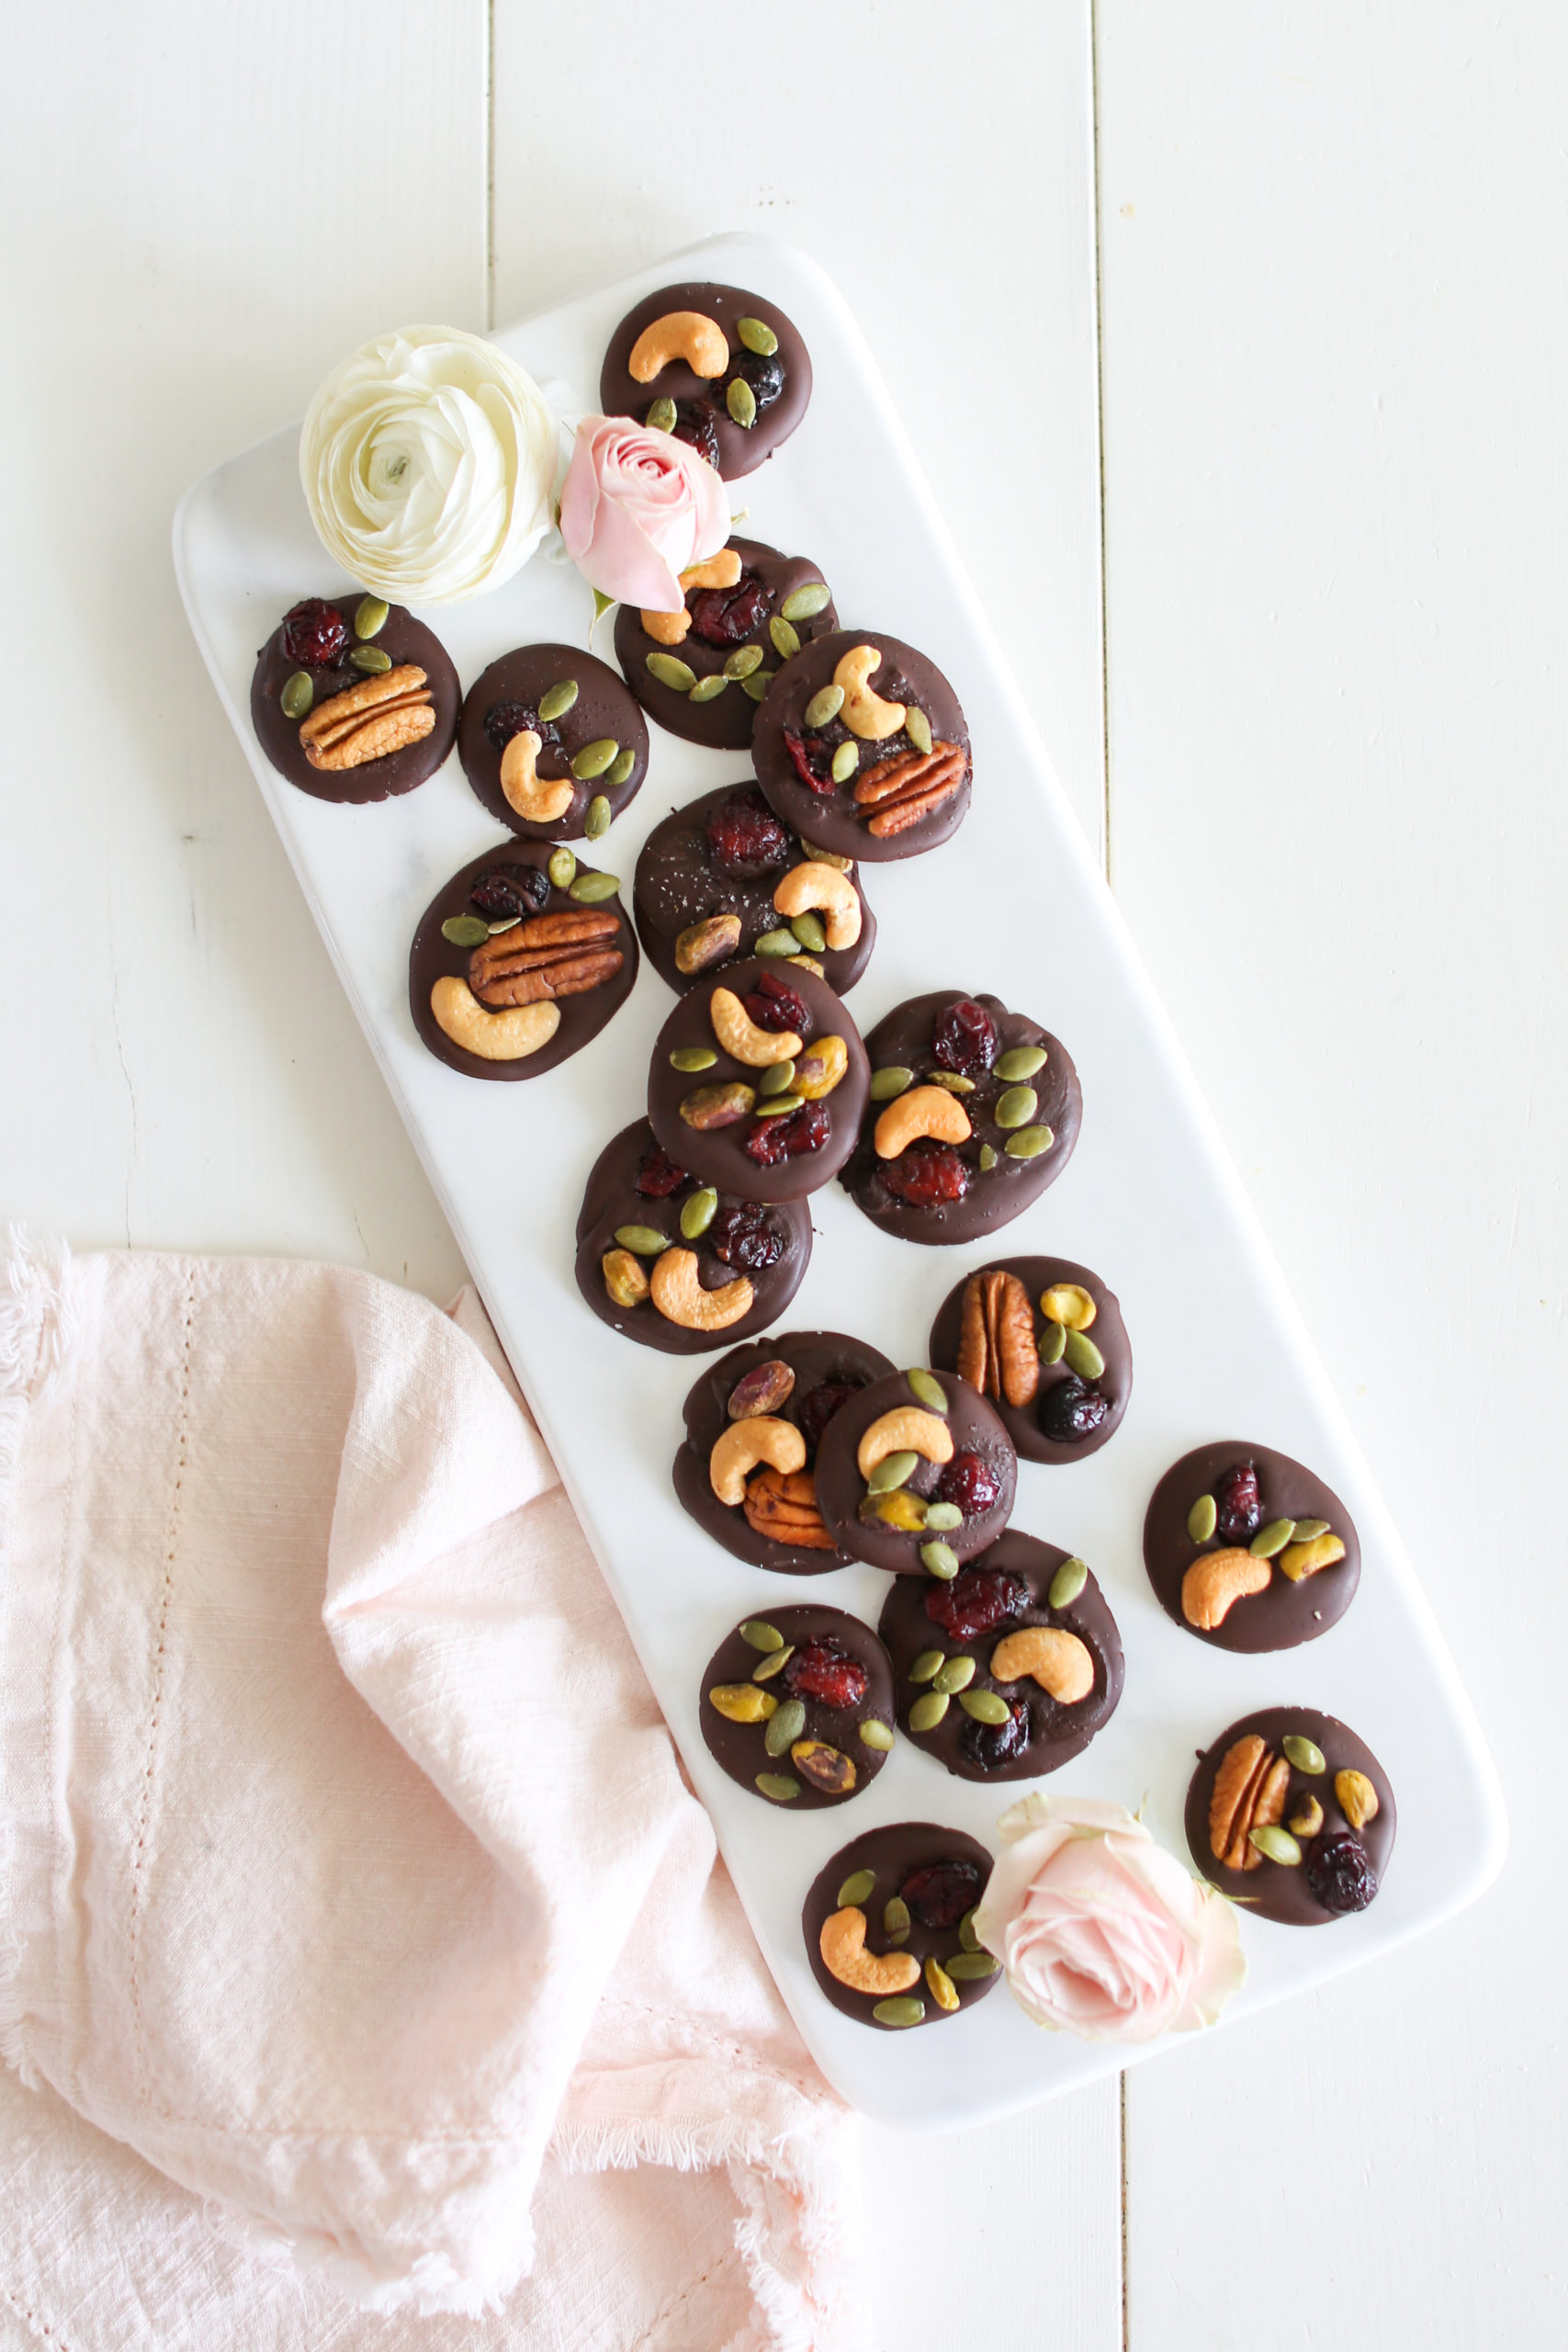 Simple Fruit and Nut Cluster Recipe for a Healthier Dessert or Snack